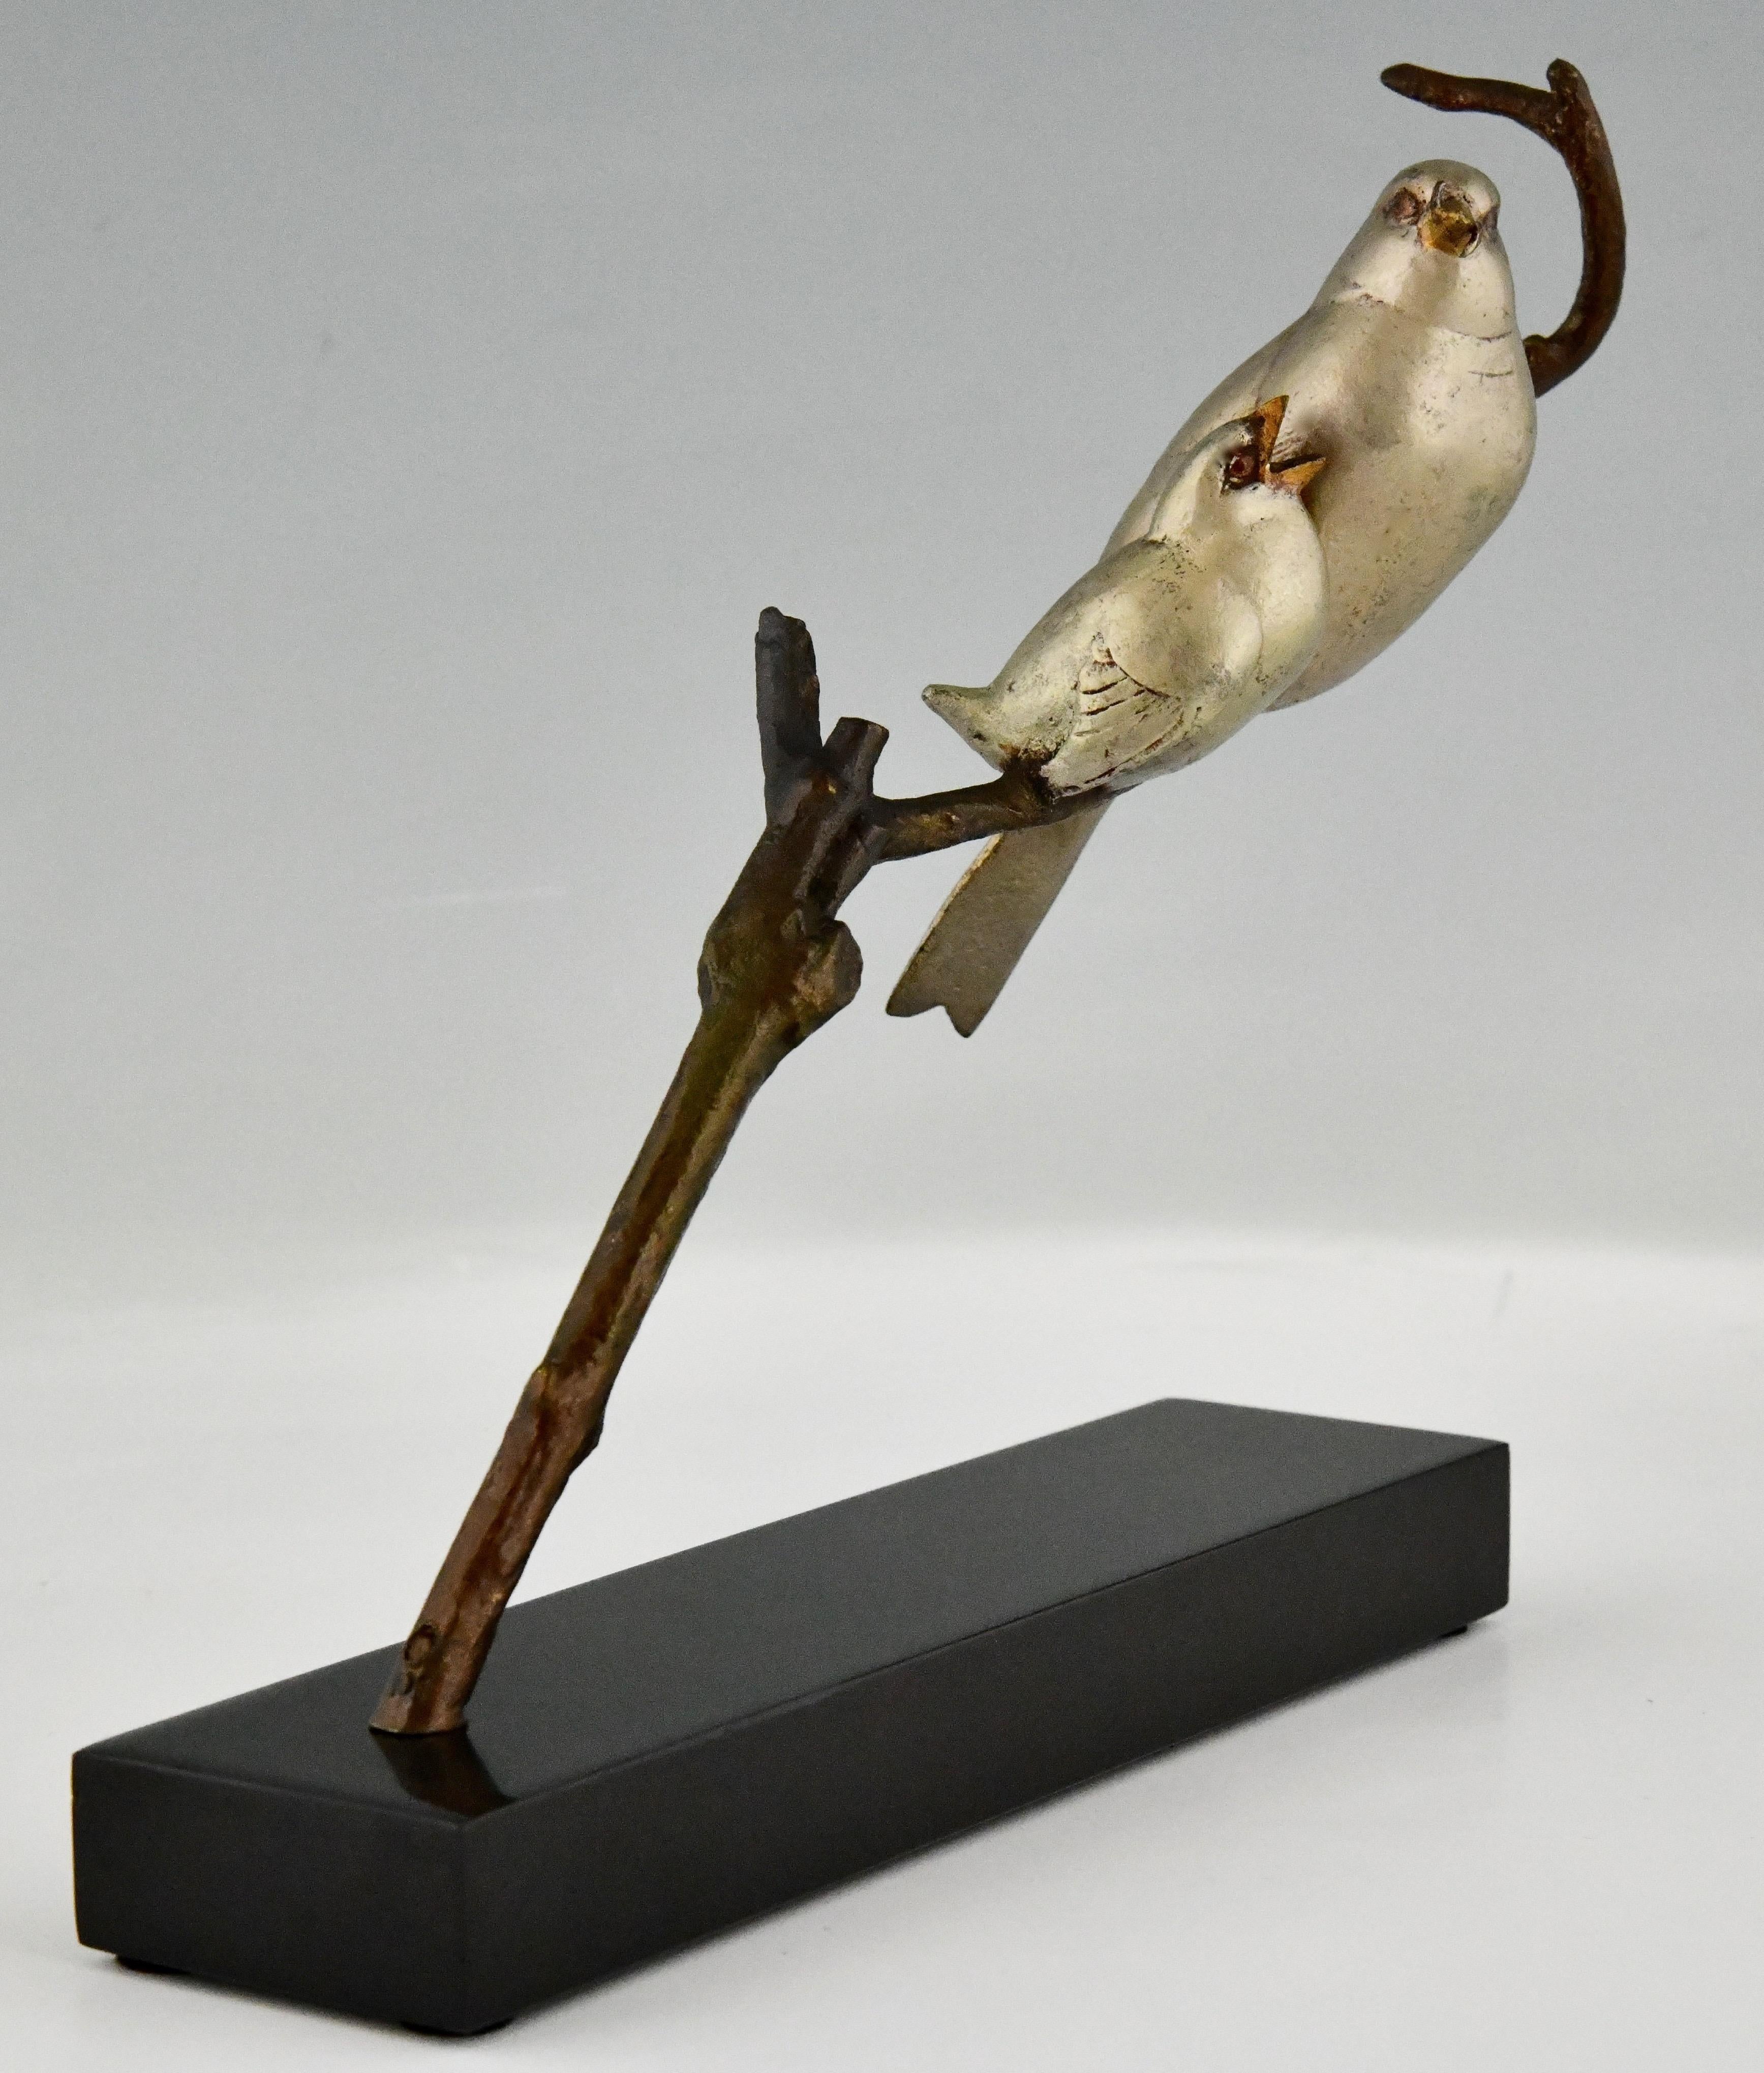 French Art Deco Sculpture Birds on a Branch Signed by André Vincent Becquerel 1930 For Sale